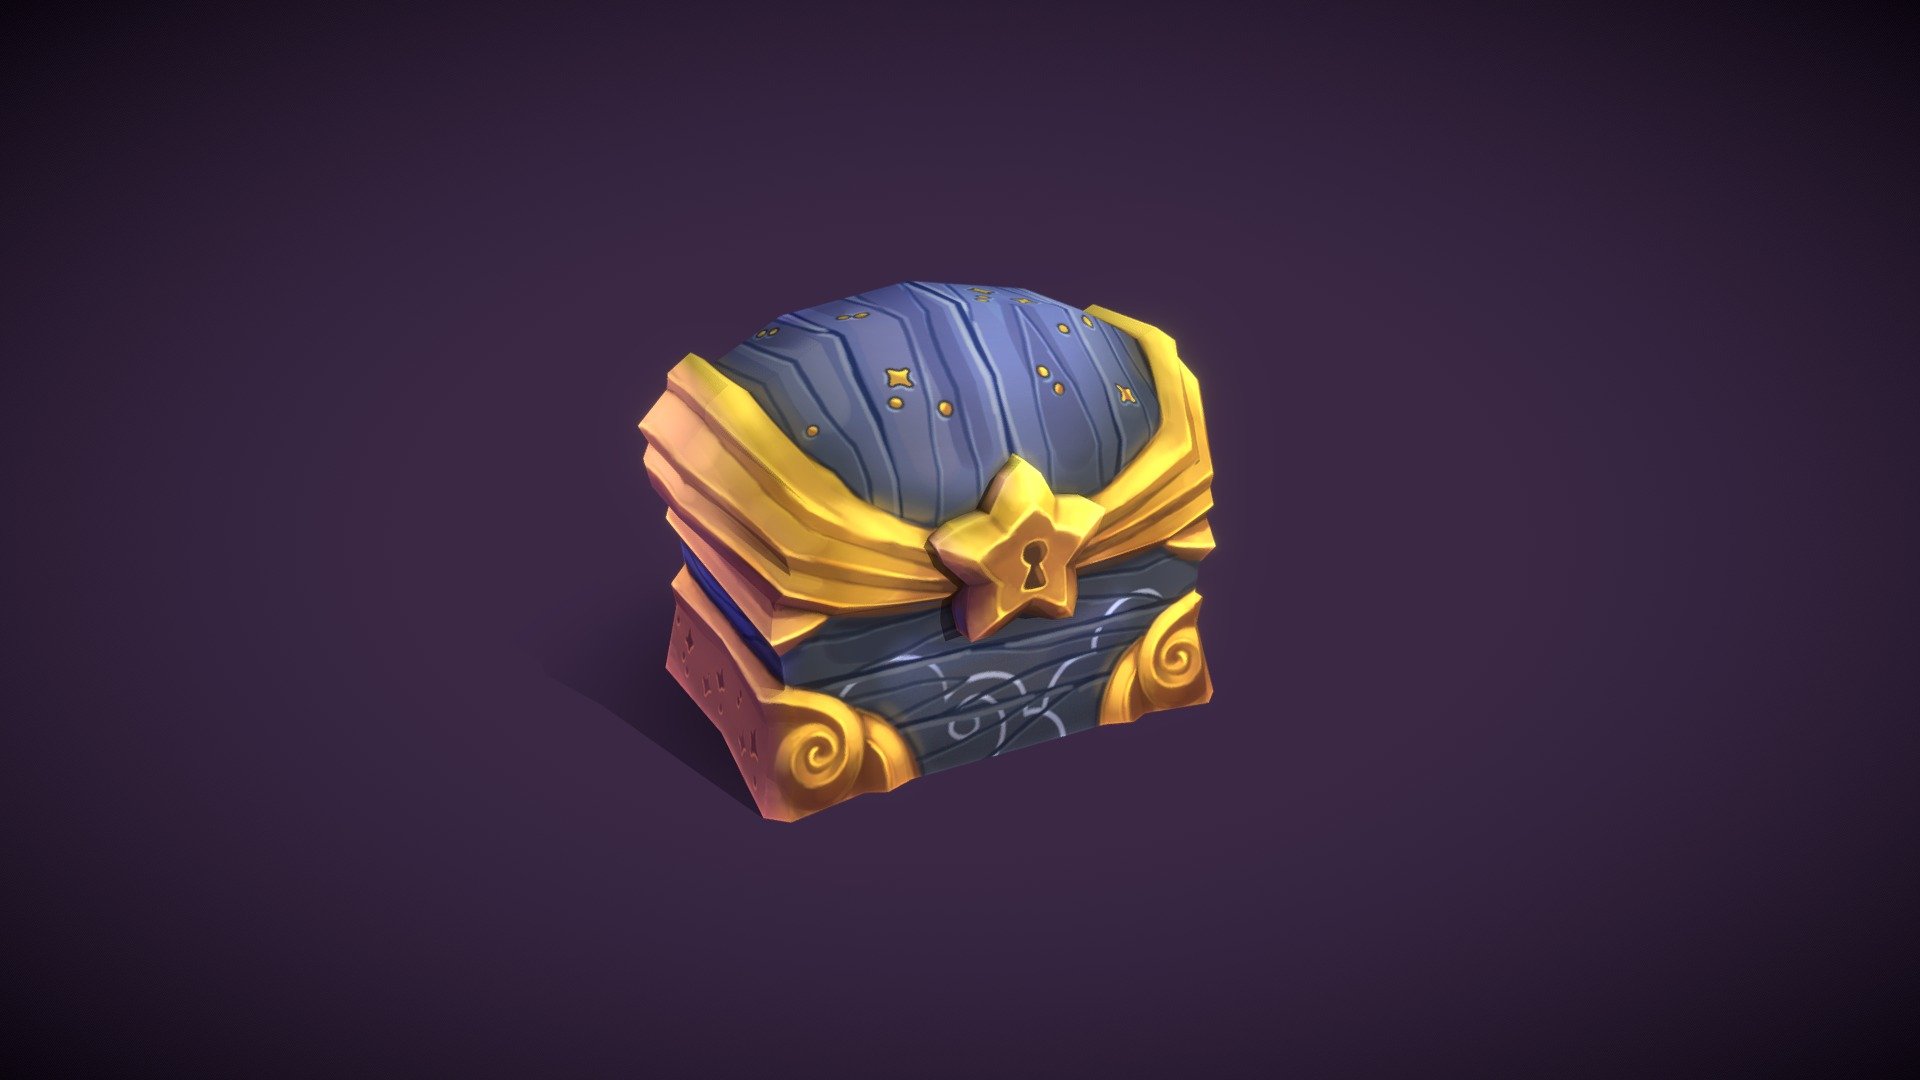 One of our earlier assignments in my Intro to 3DSMax class at LCAD! 

Modeled in 3DSMax, textured in Photoshop and 3DCoat - Chest of Dreams - 3D model by Nicole "CmdrSpaceCat" Rusk (@cmdrspacecat) 3d model